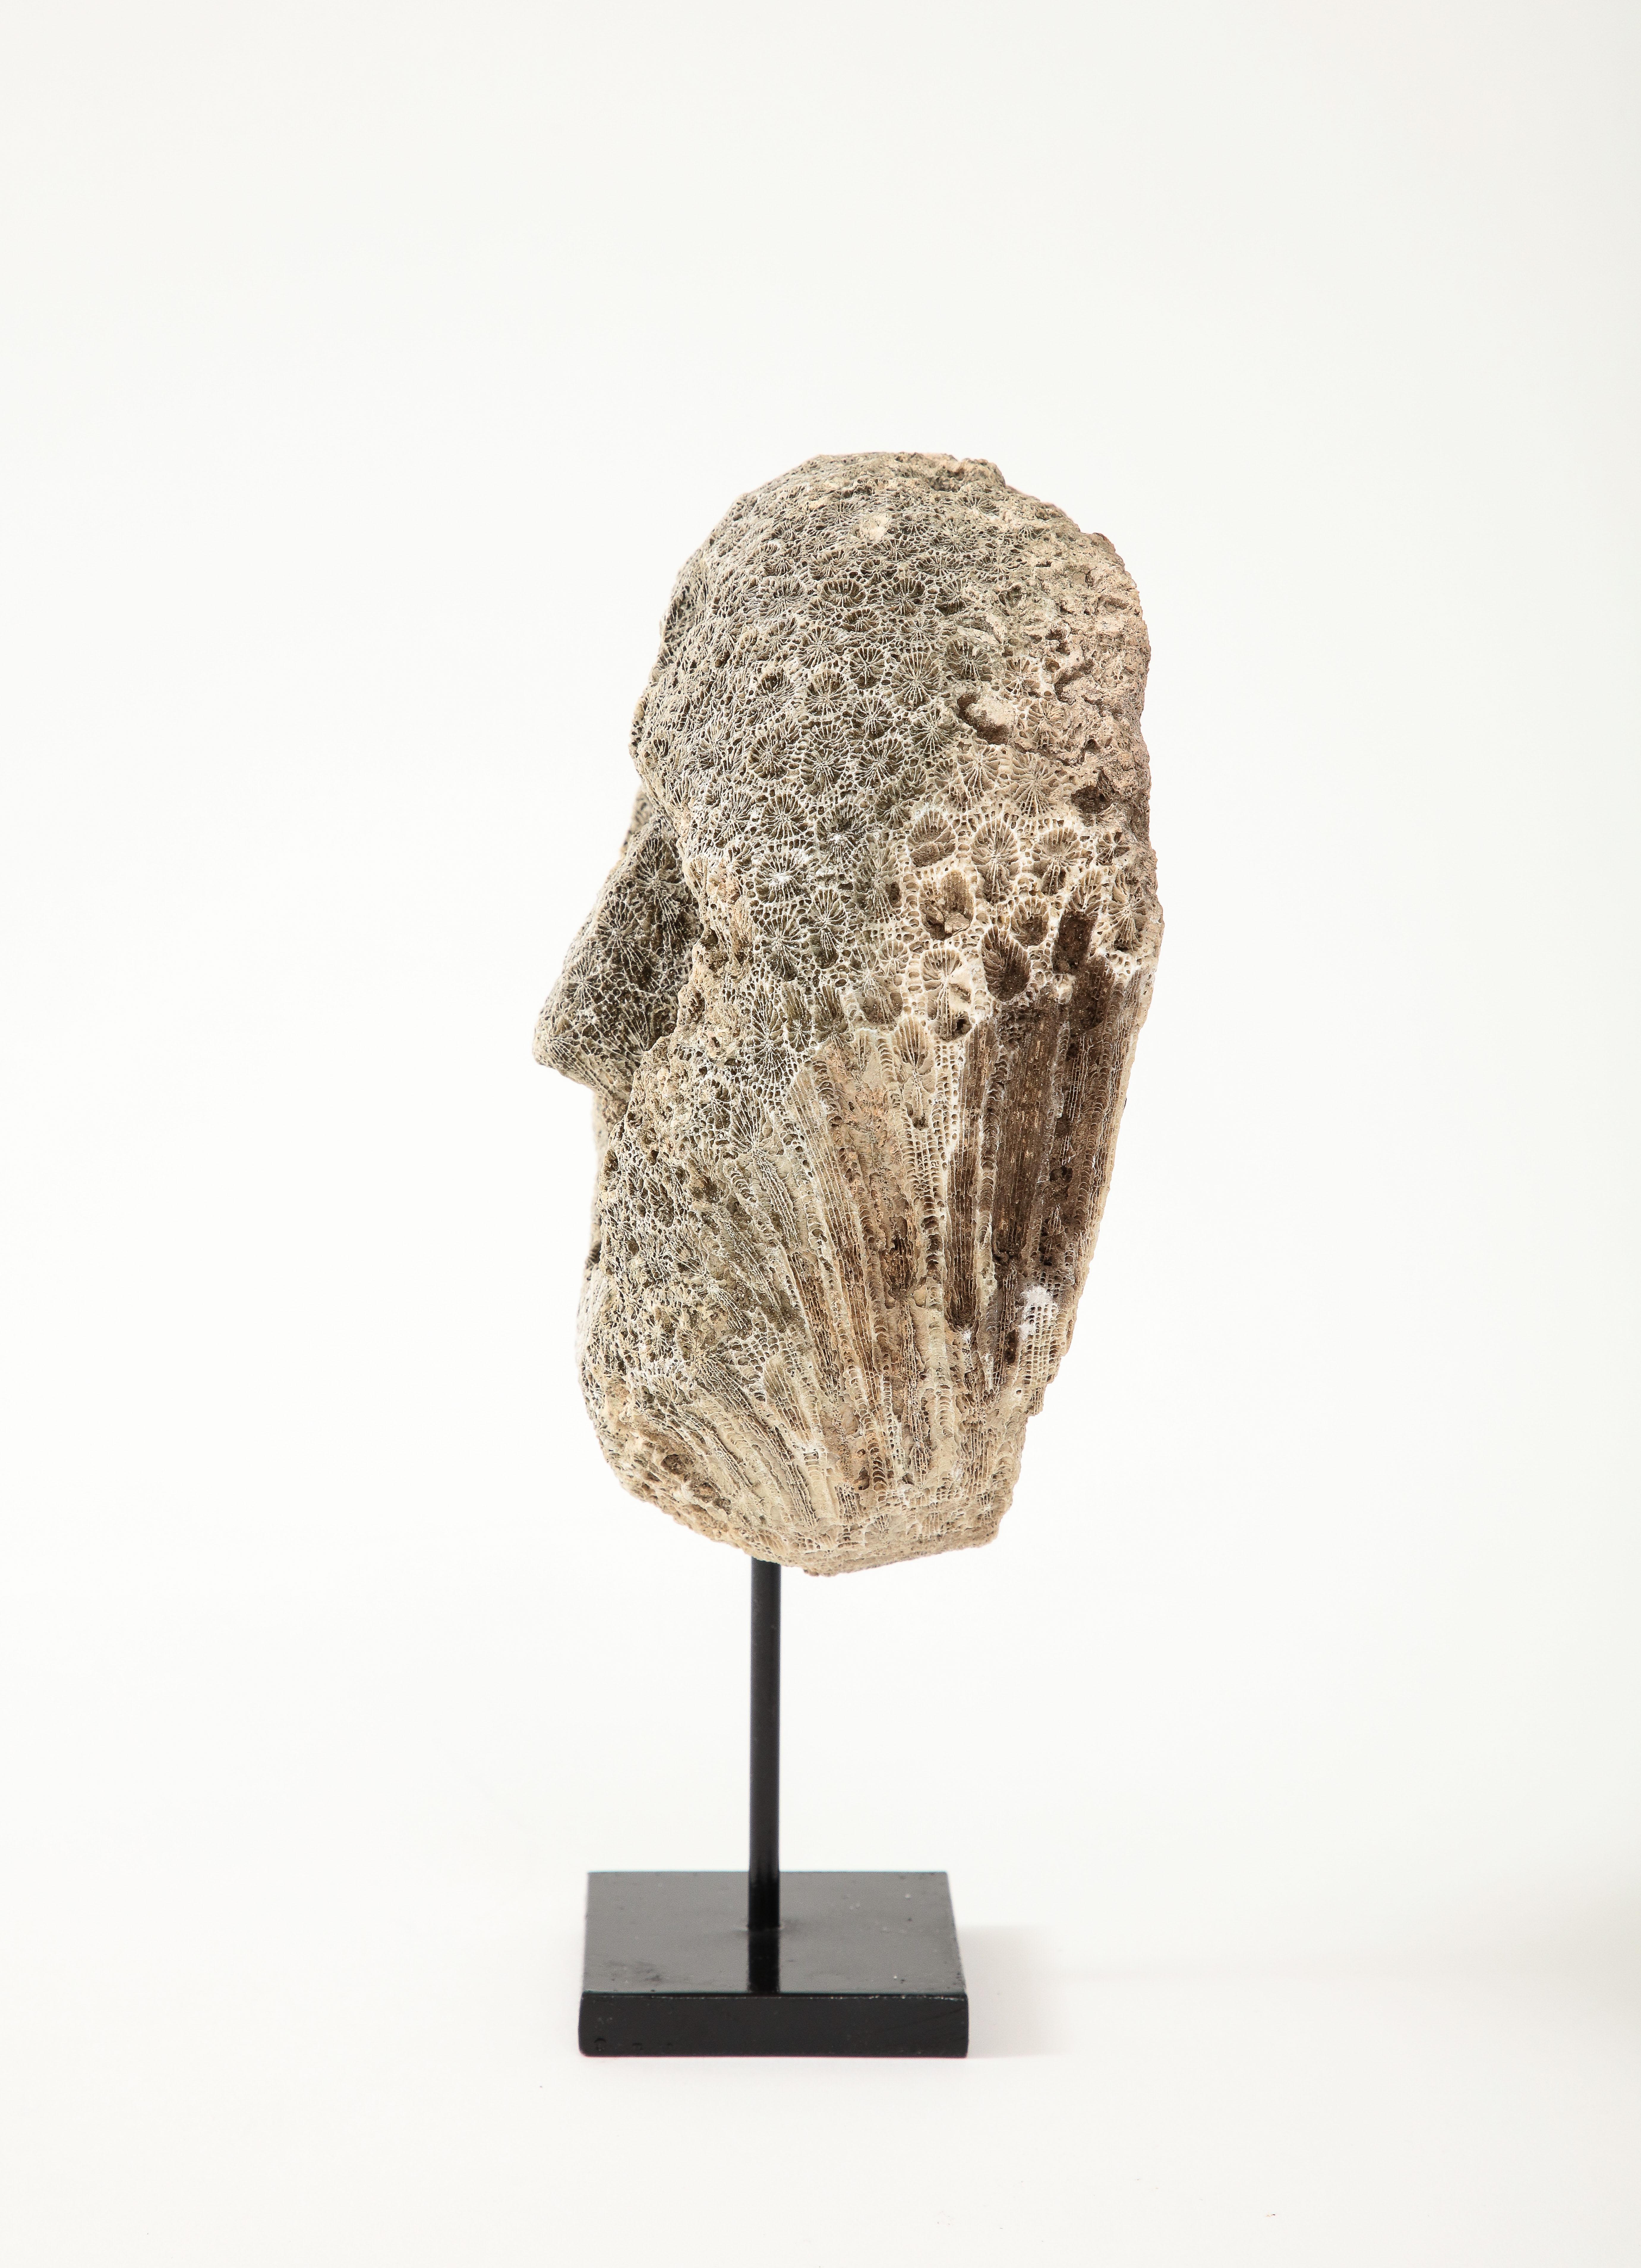 Timorese Fossilized Coral Animist Mask by the Atomi People of Timor  For Sale